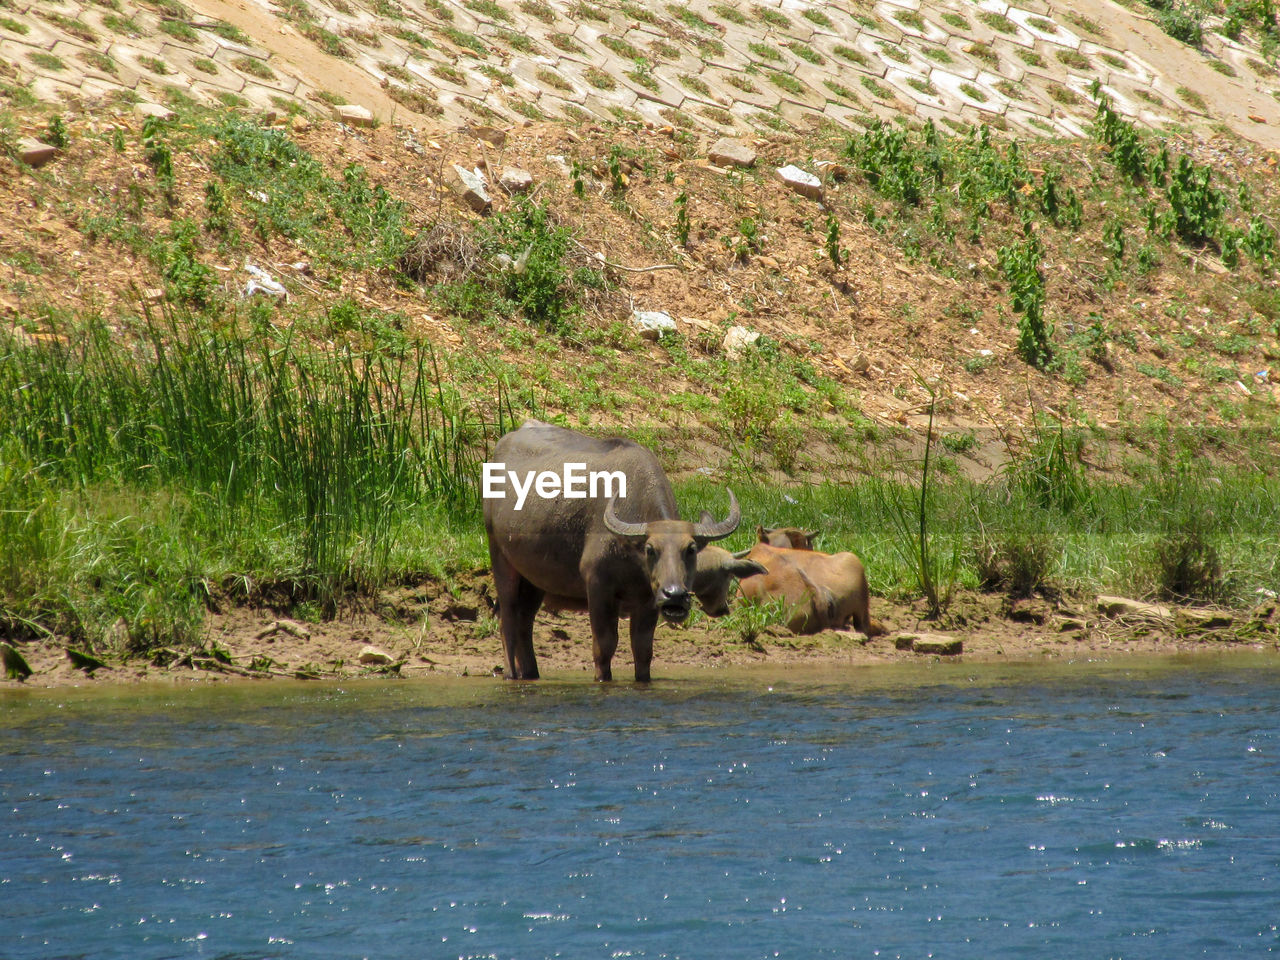 Some buffaloes are drinking water near the river